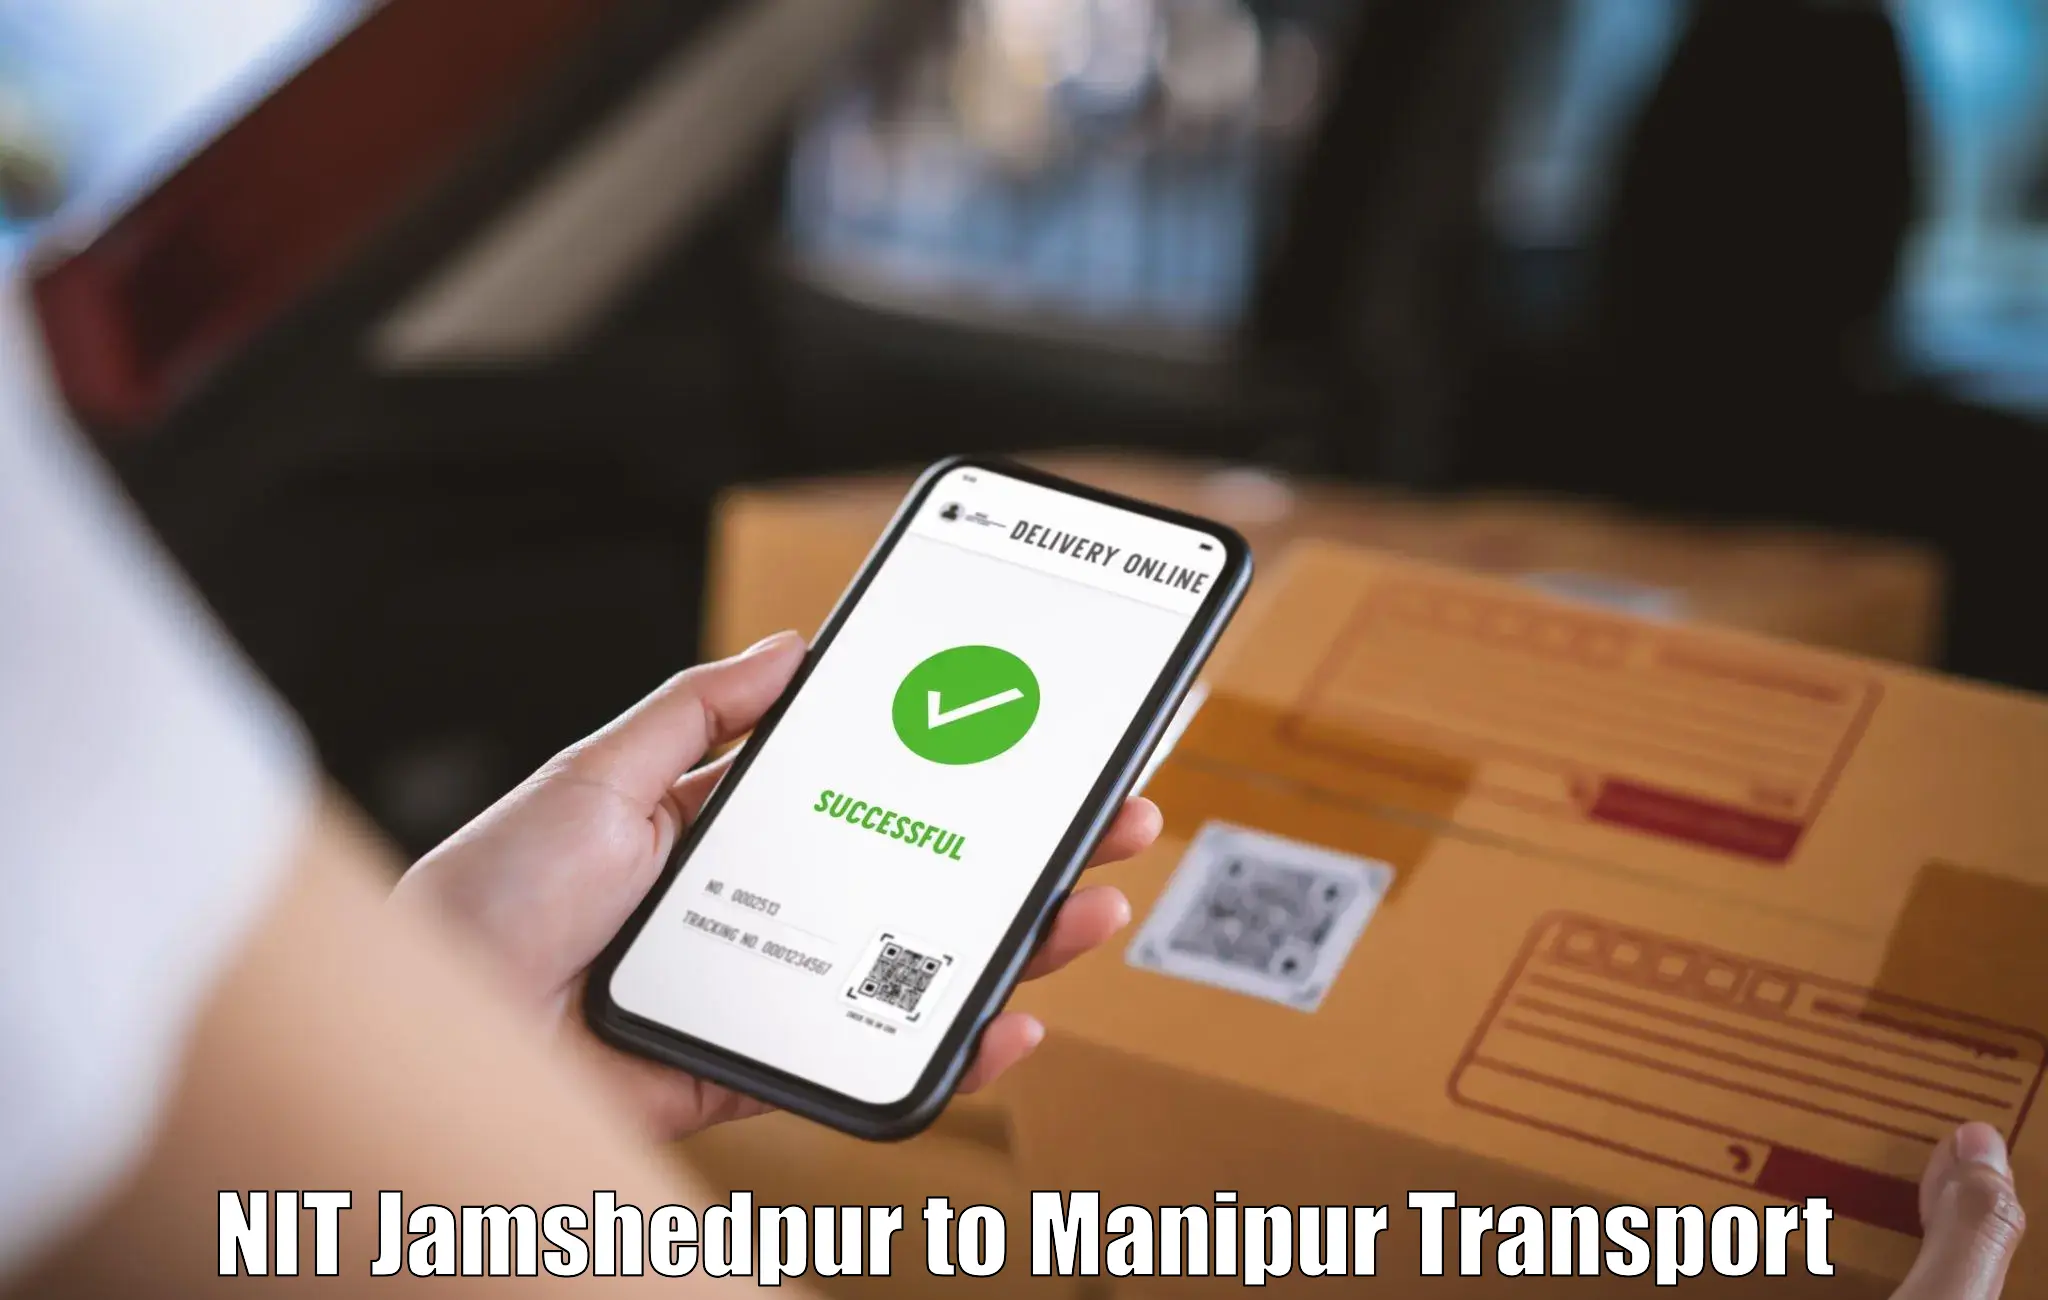 Transport in sharing in NIT Jamshedpur to Imphal